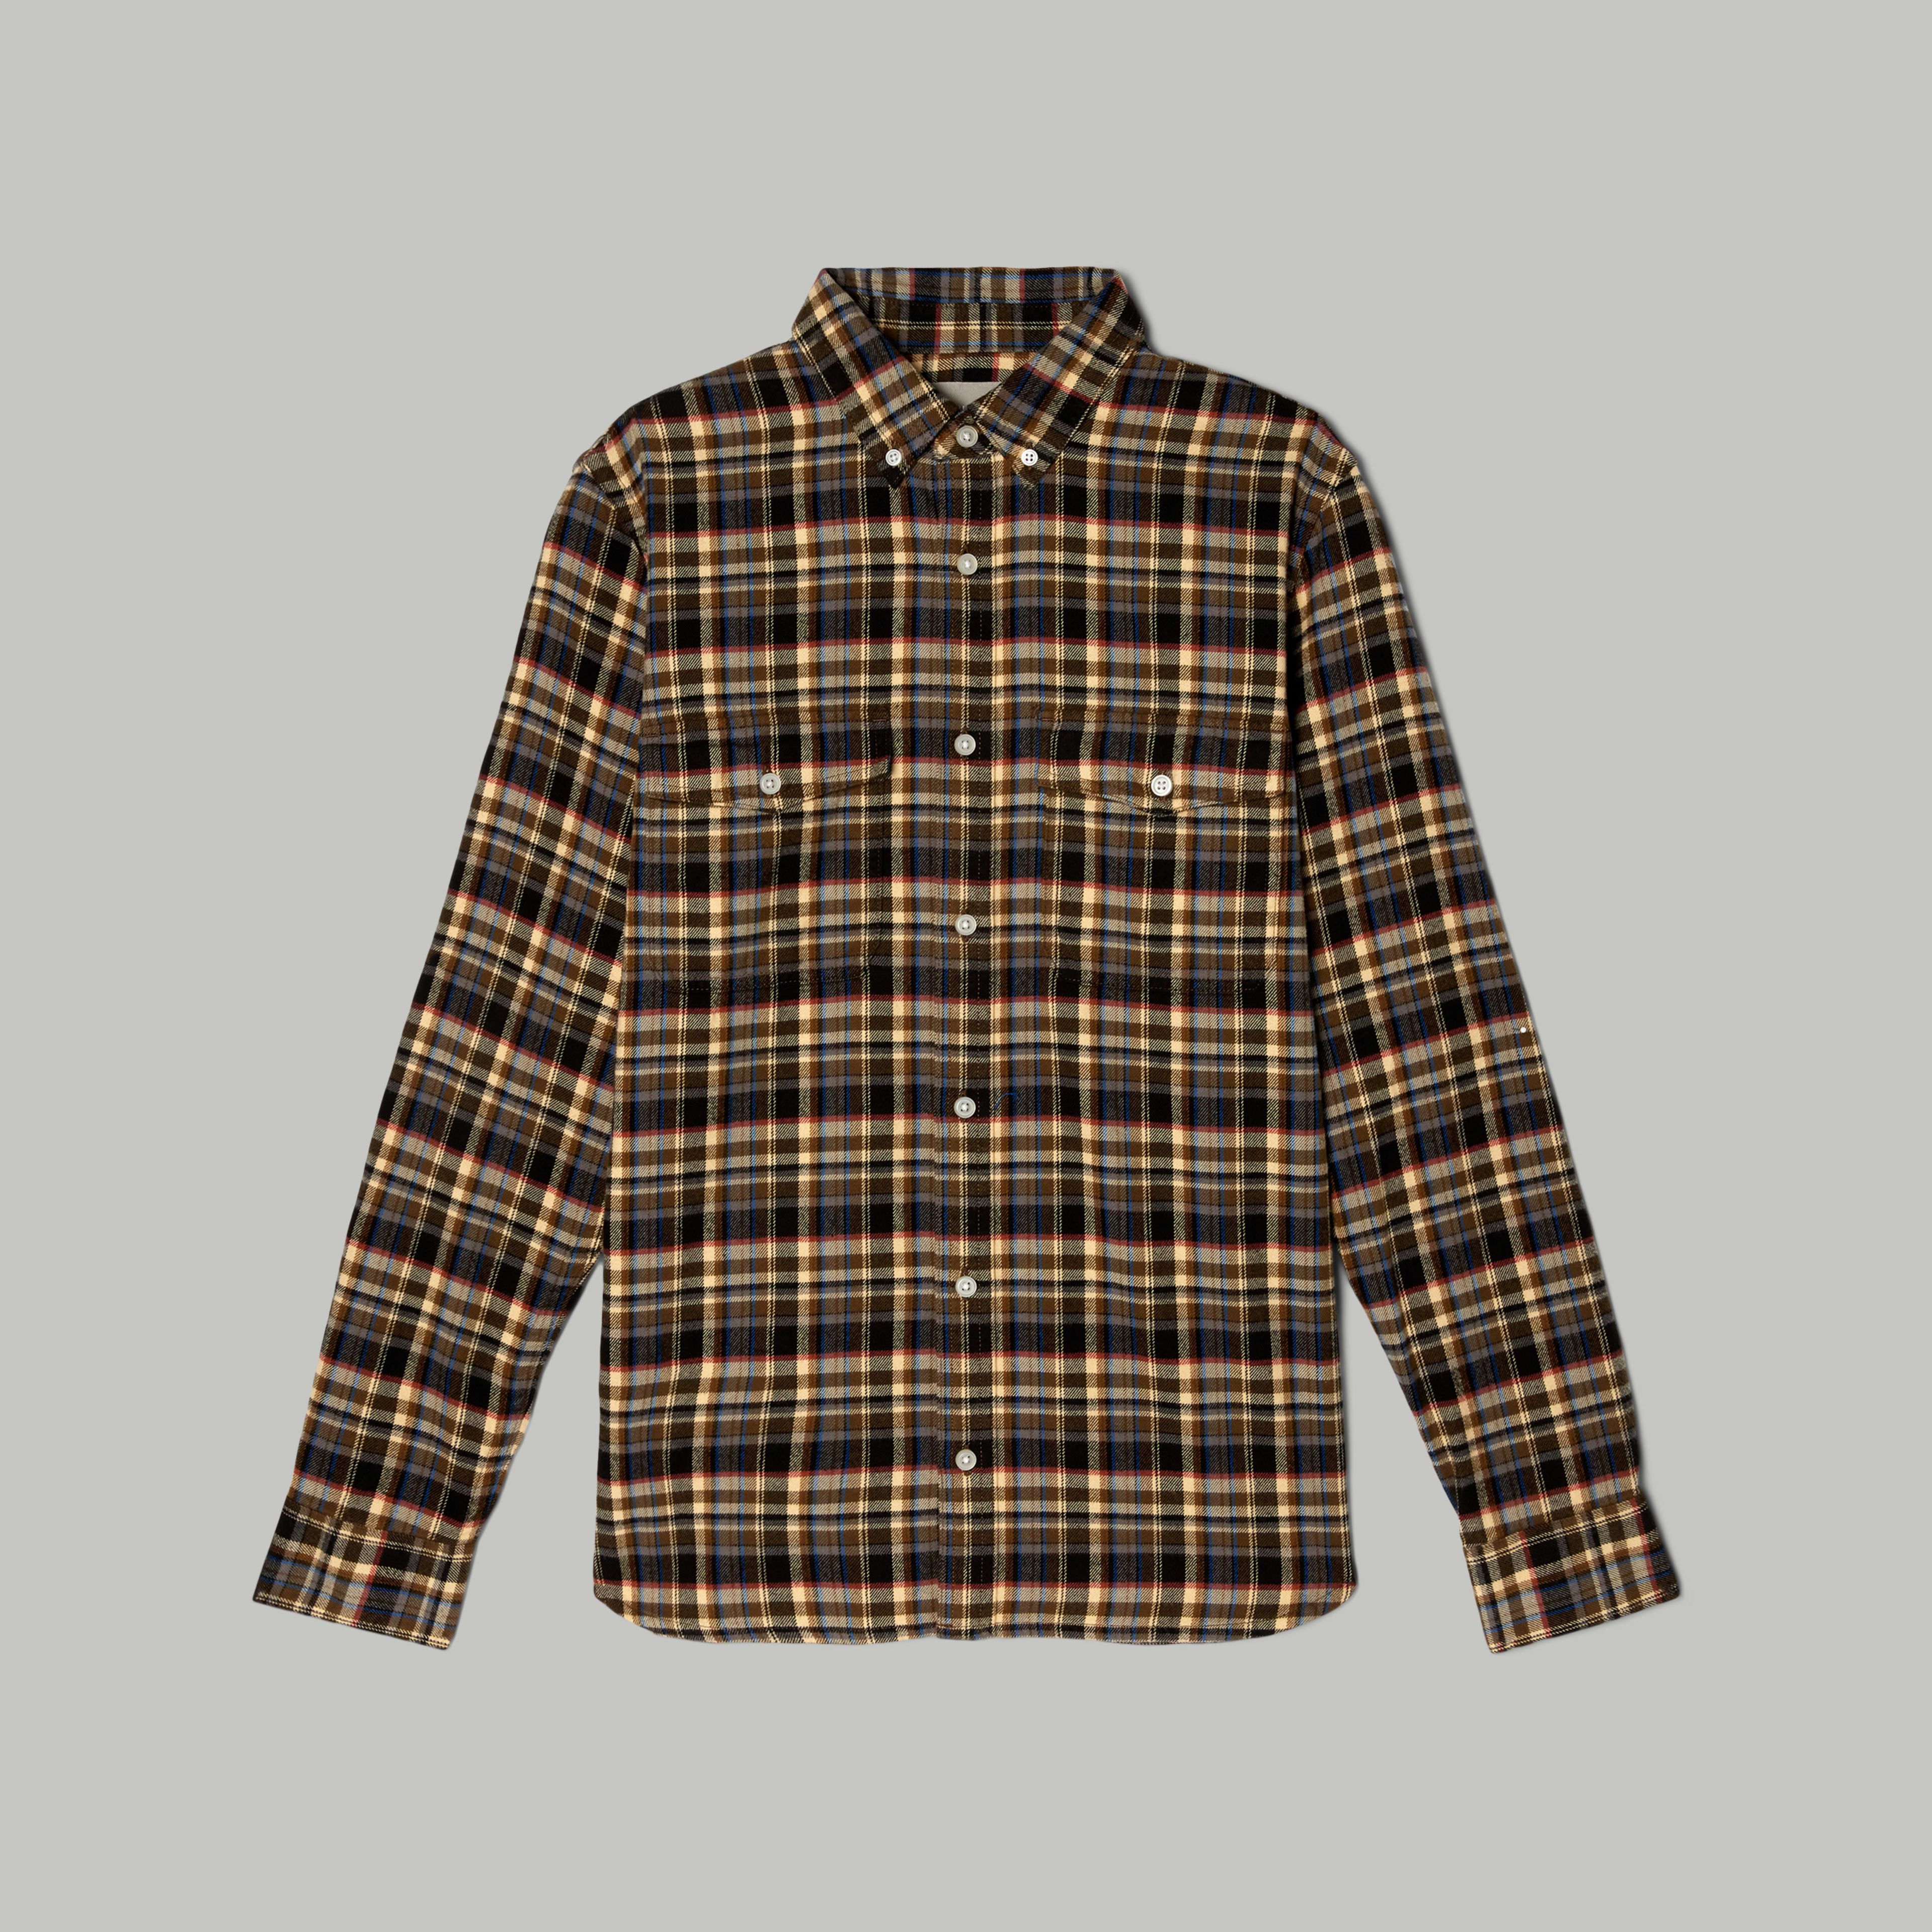 Men's Brushed Flannel Shirt by Everlane in Black/Olive, Size XXL